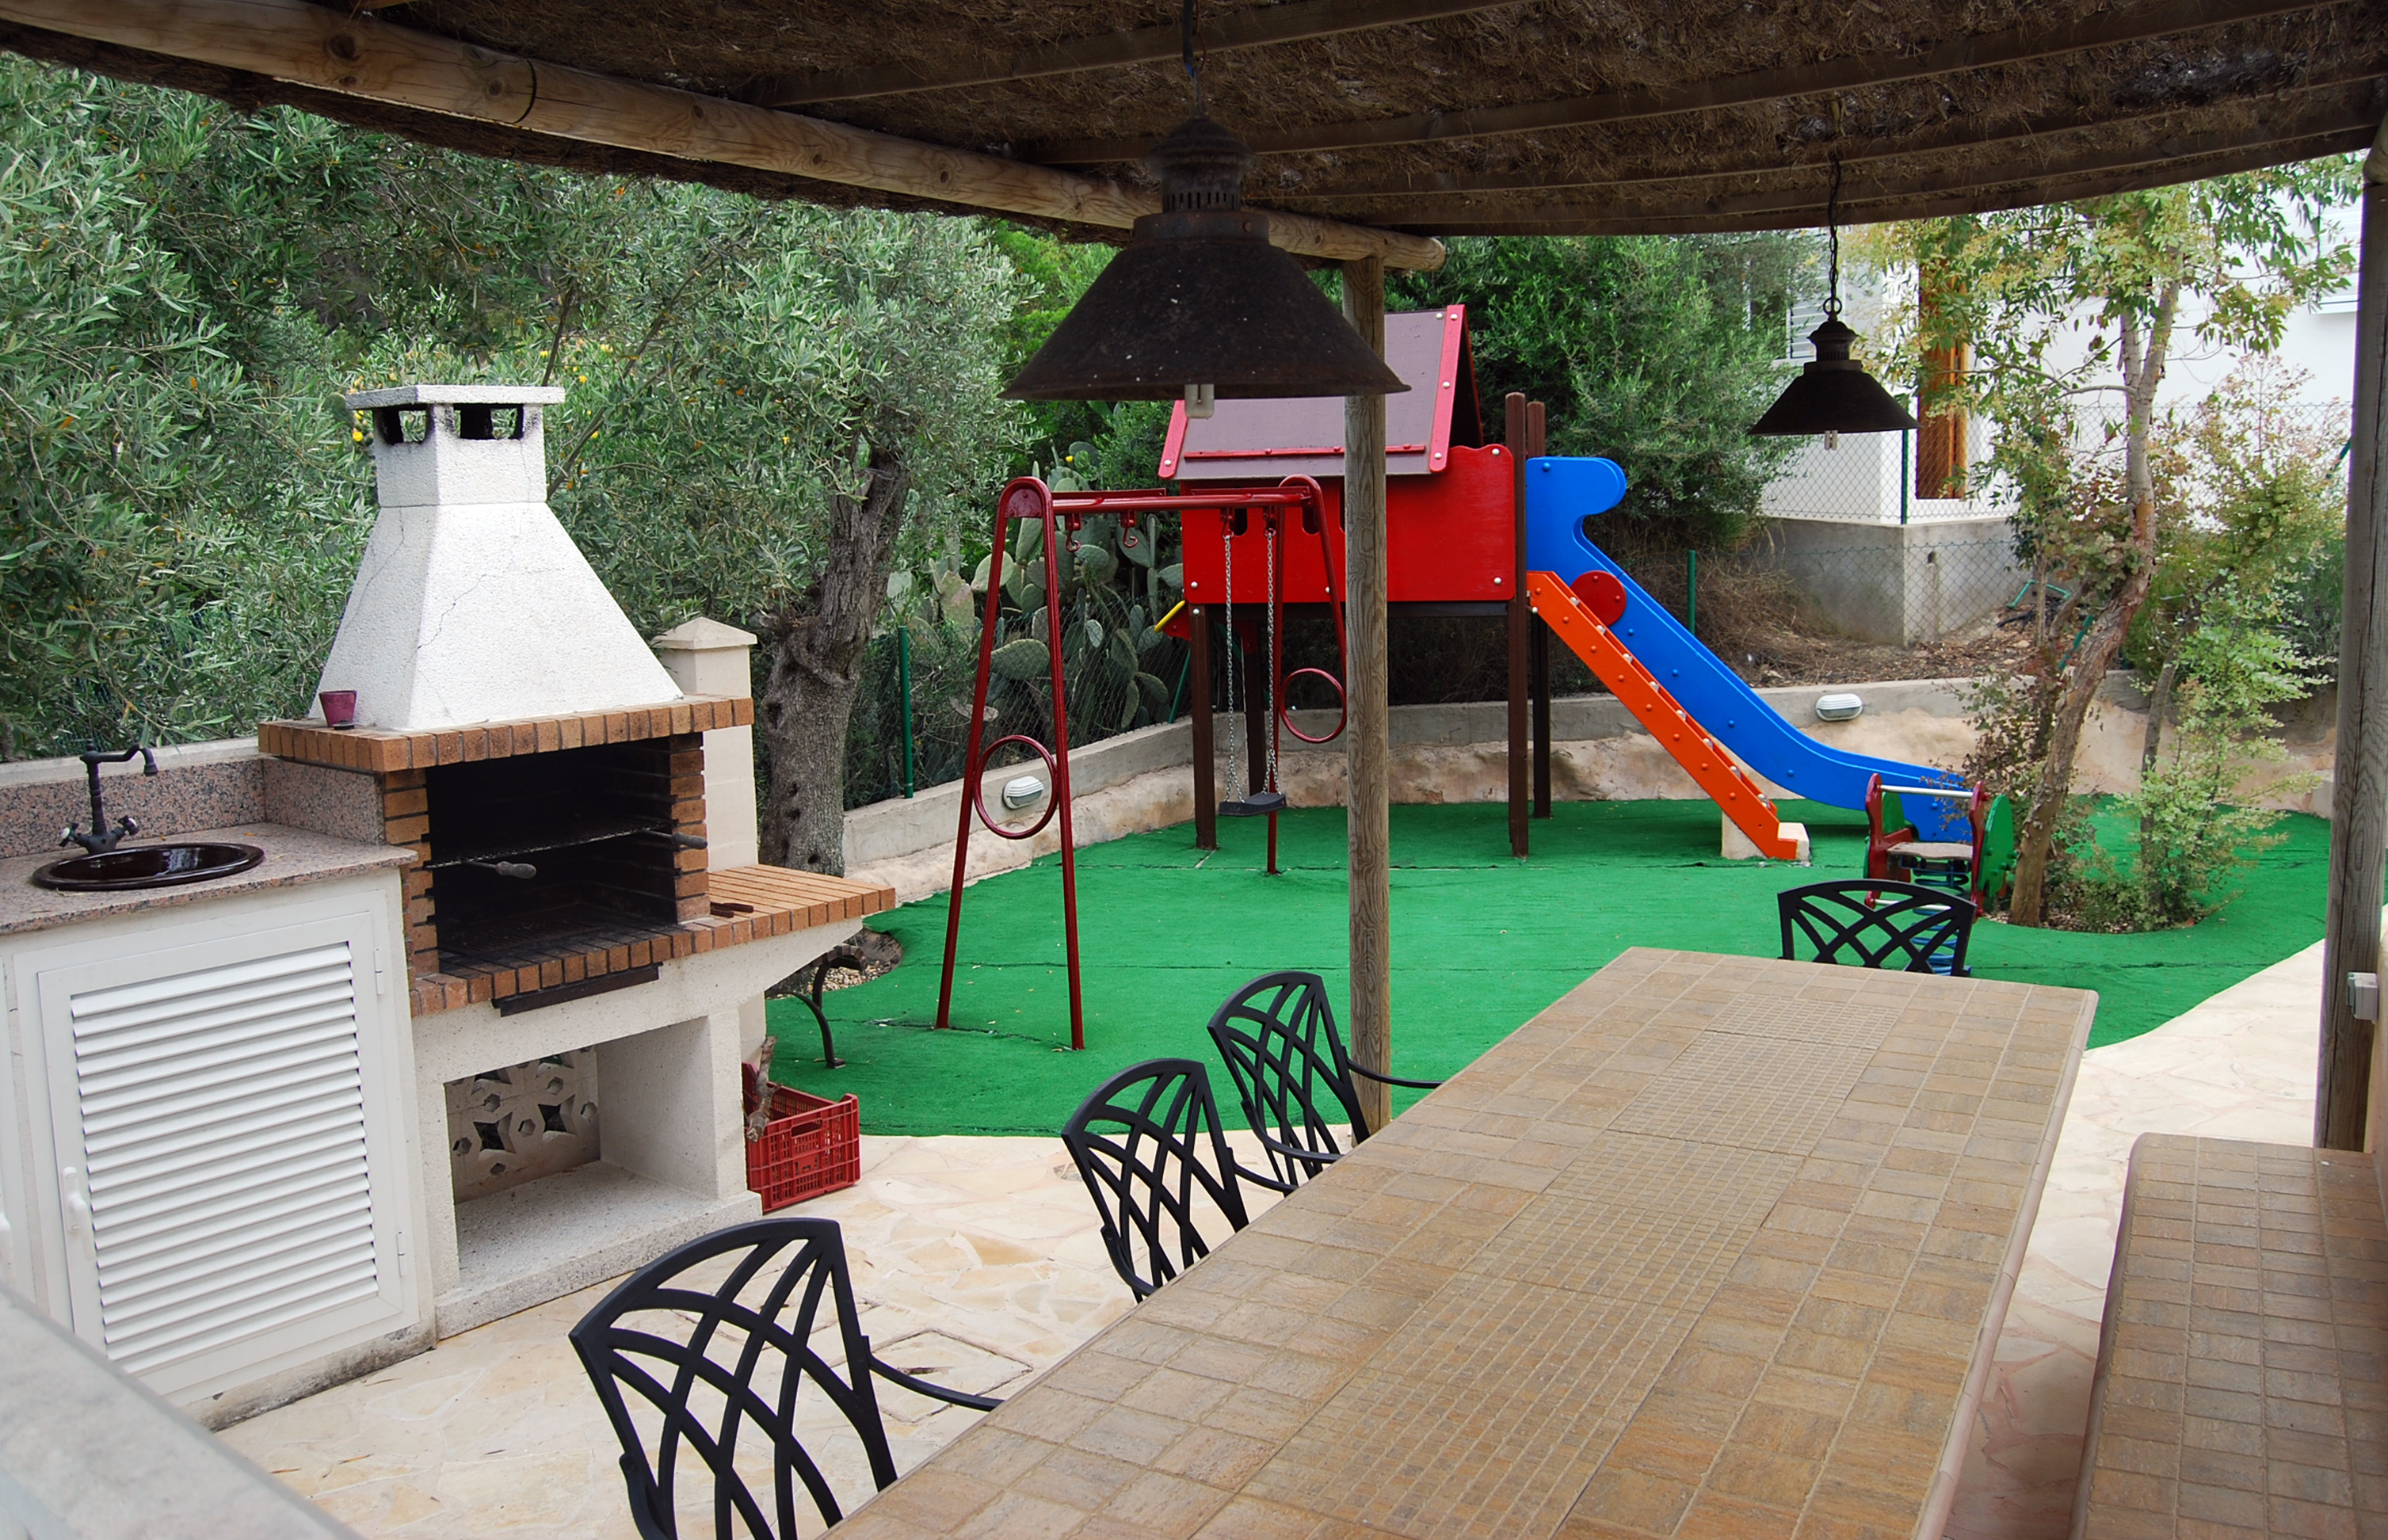 Outside dining table with barbecue next to a children's area